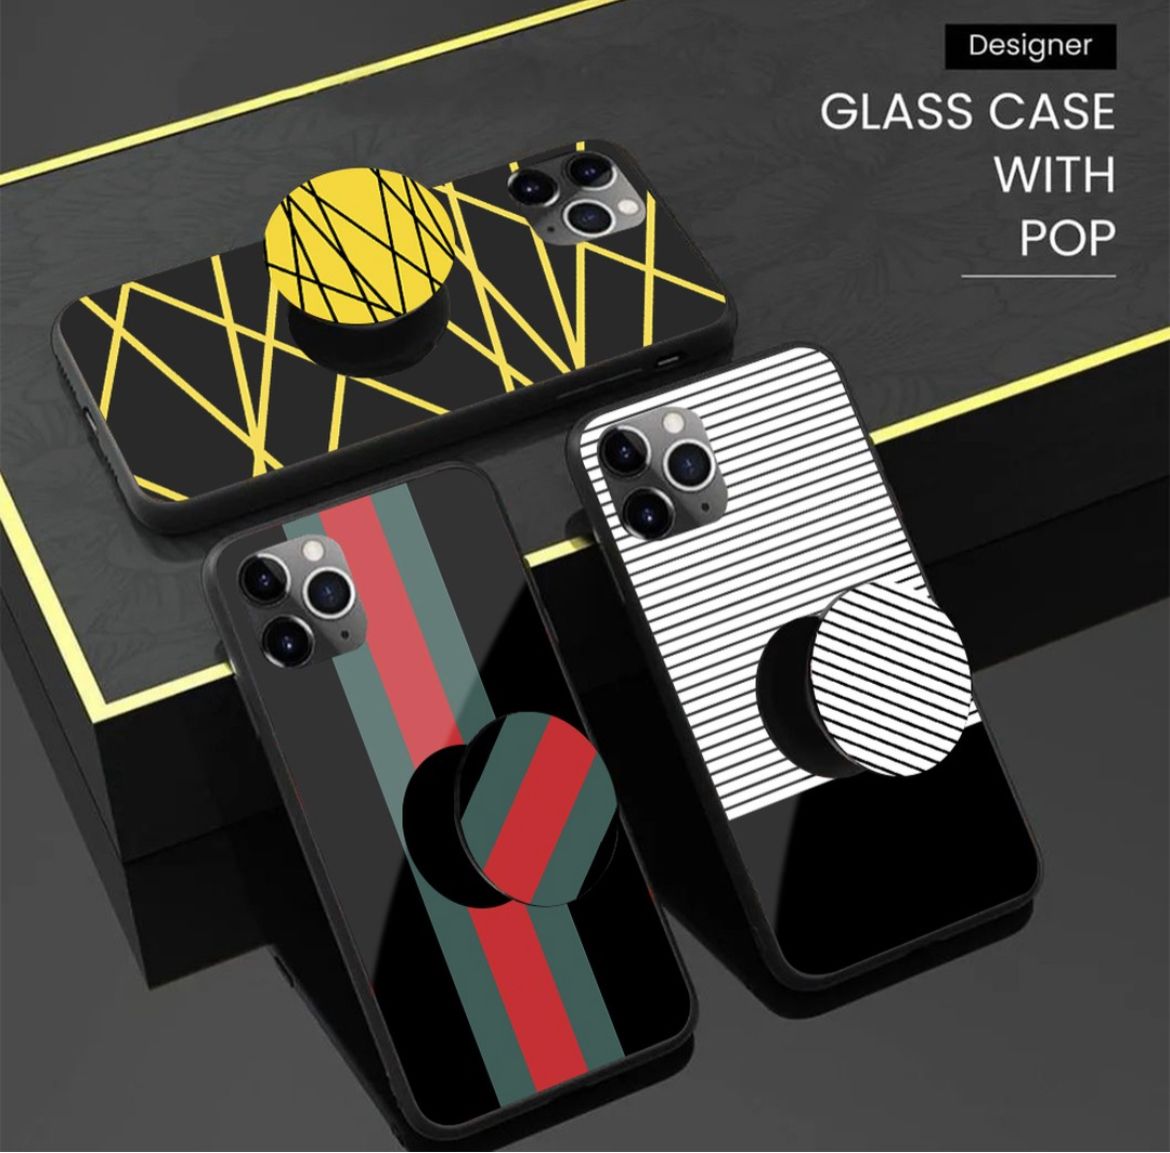 Customise cases with matching Pop Socket